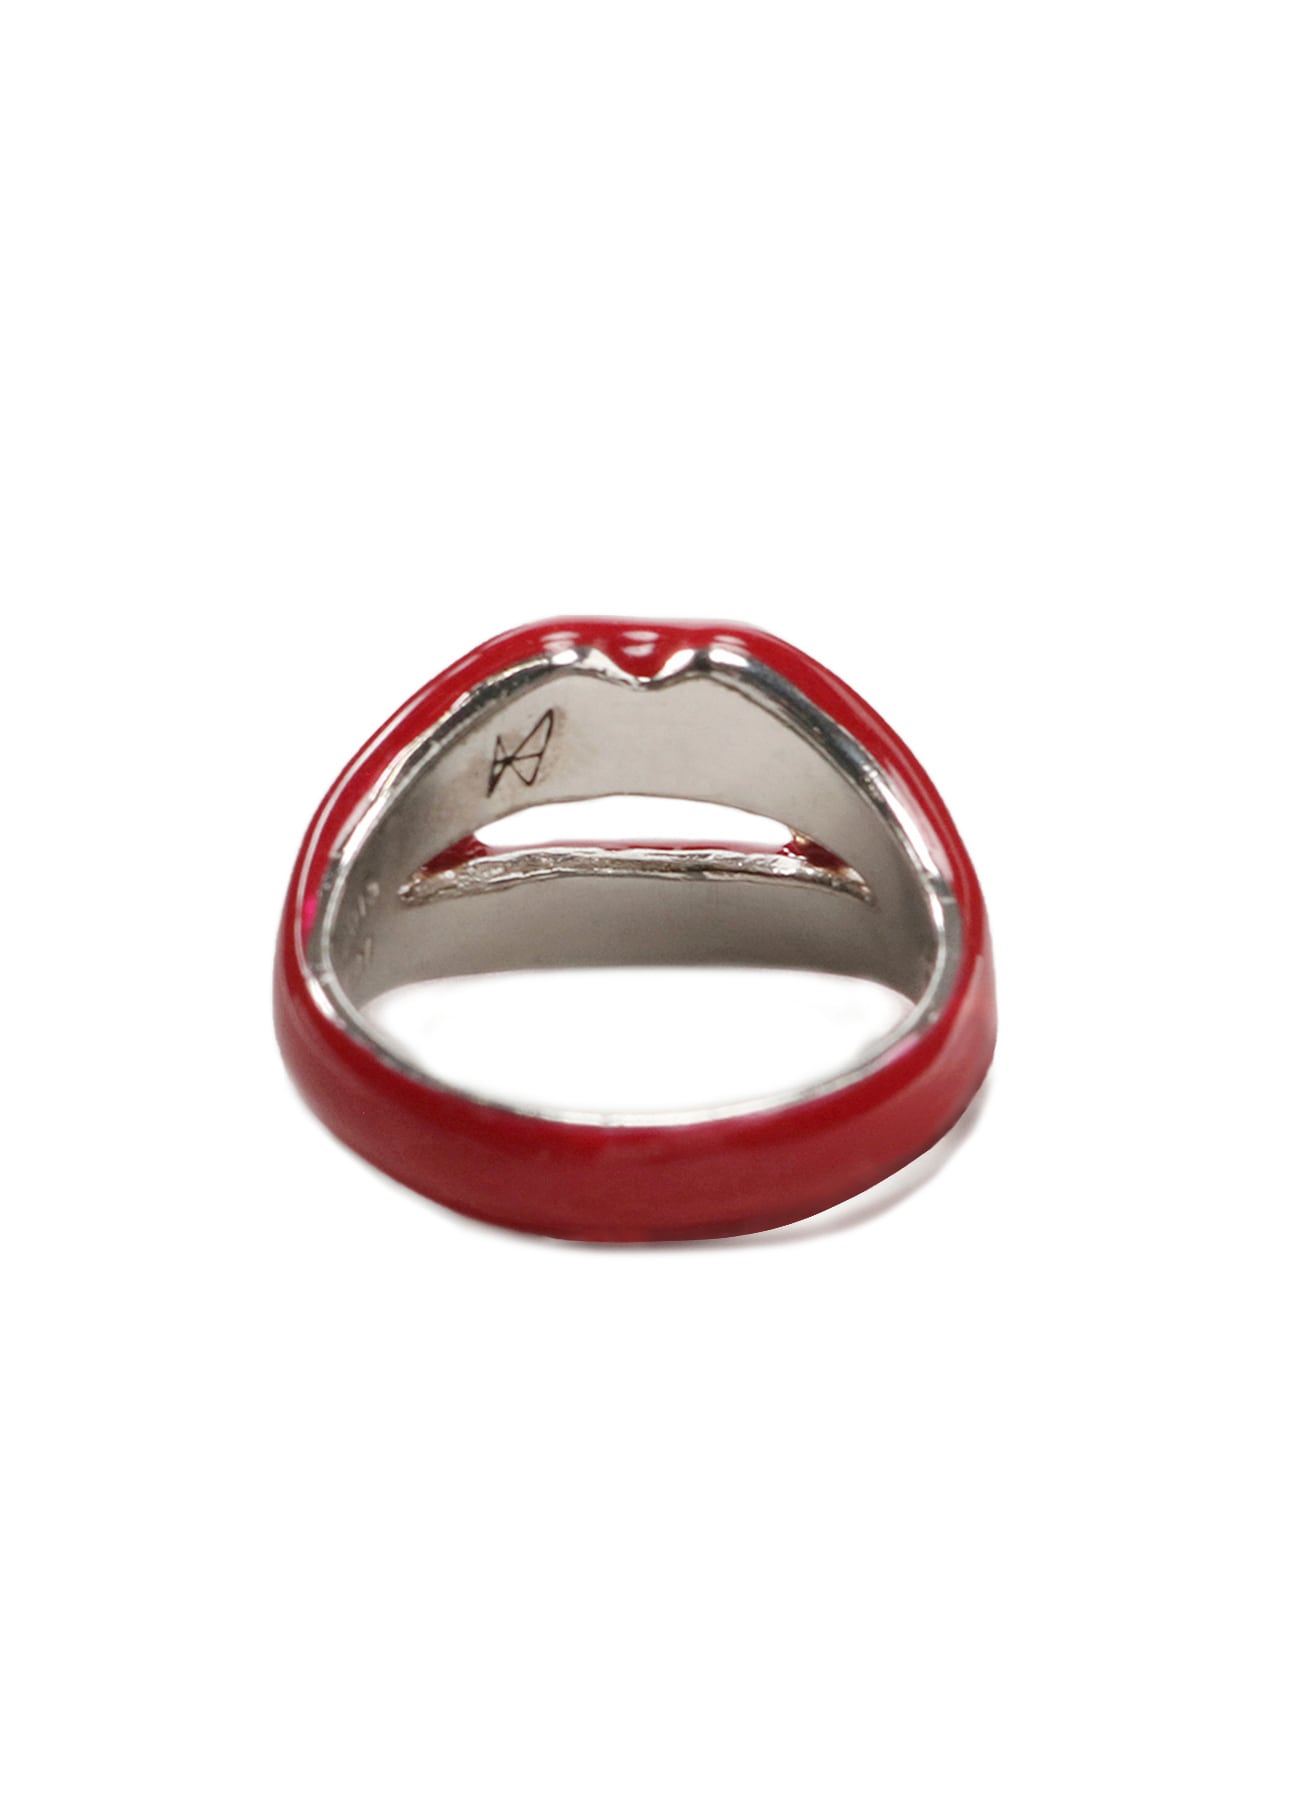 SILVER 950 VAMPIRE FANG RING ROUGE